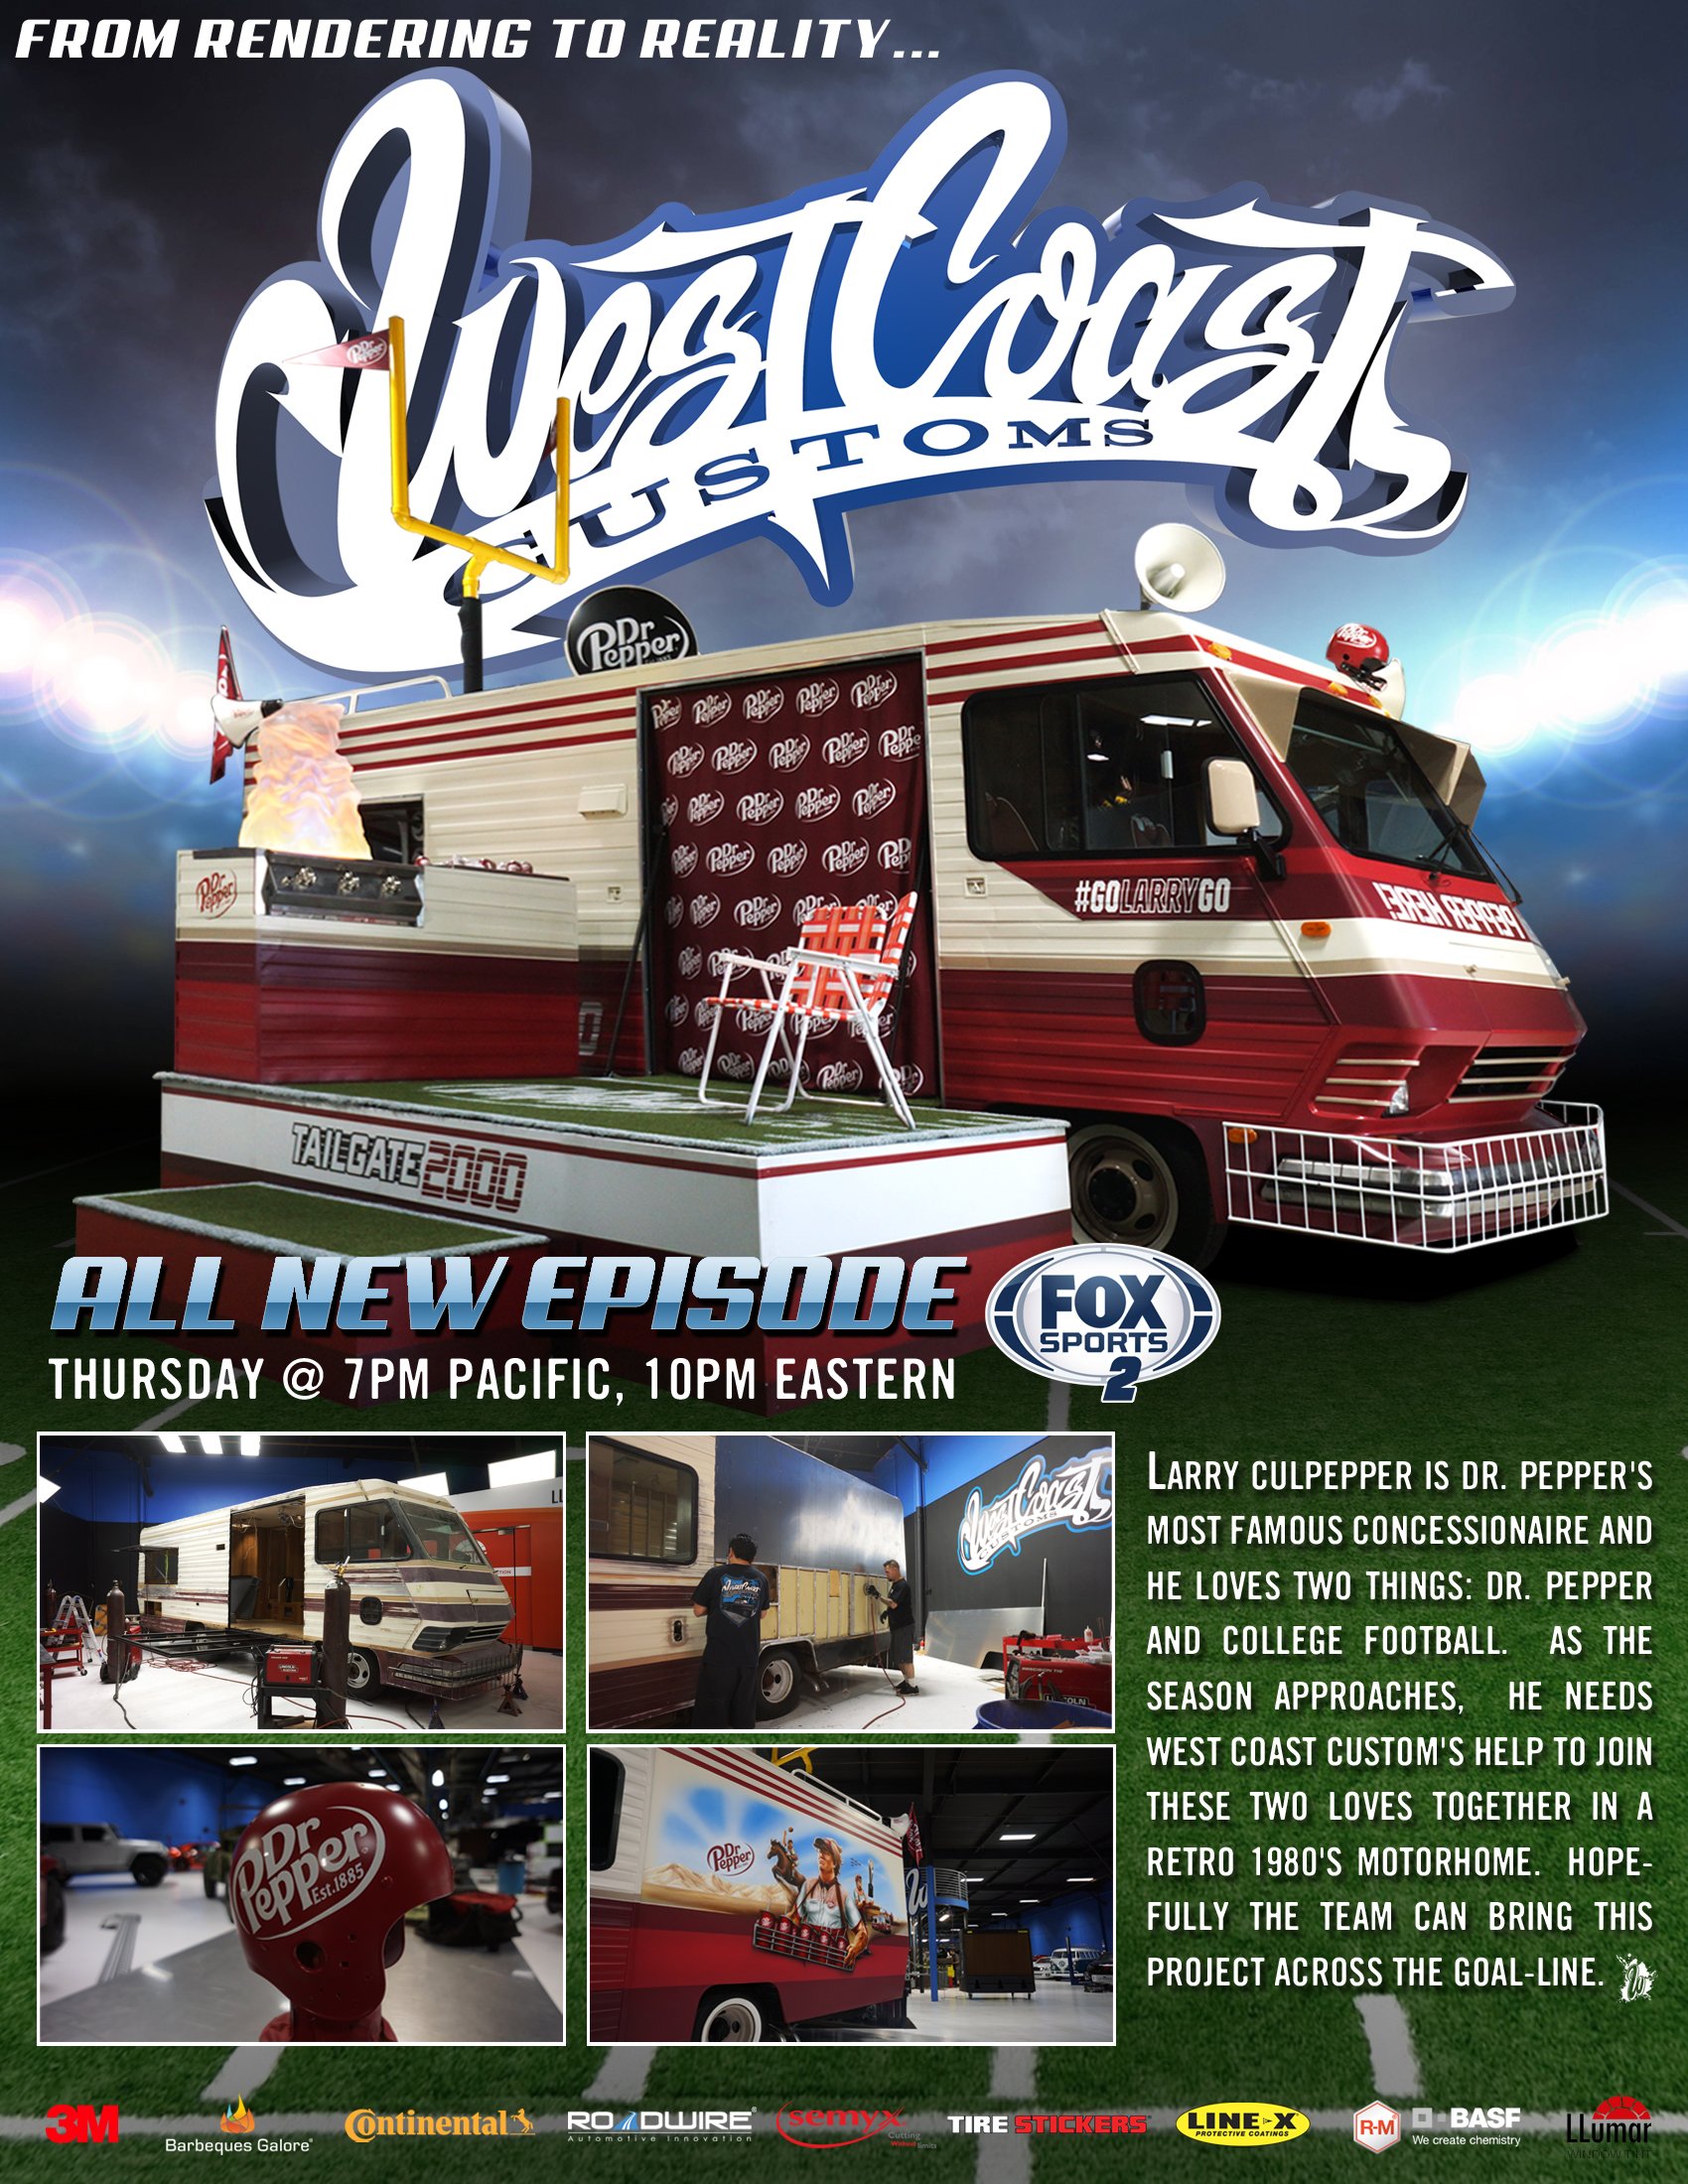 West Coast Customs on Twitter: "Tune in to Fox Sports 2 RIGHT NOW for a New  Episode of #WestCoastCustoms! #DrPepper #FoxSport2 #NewEpisode  https://t.co/kFON2wMpZl" / Twitter